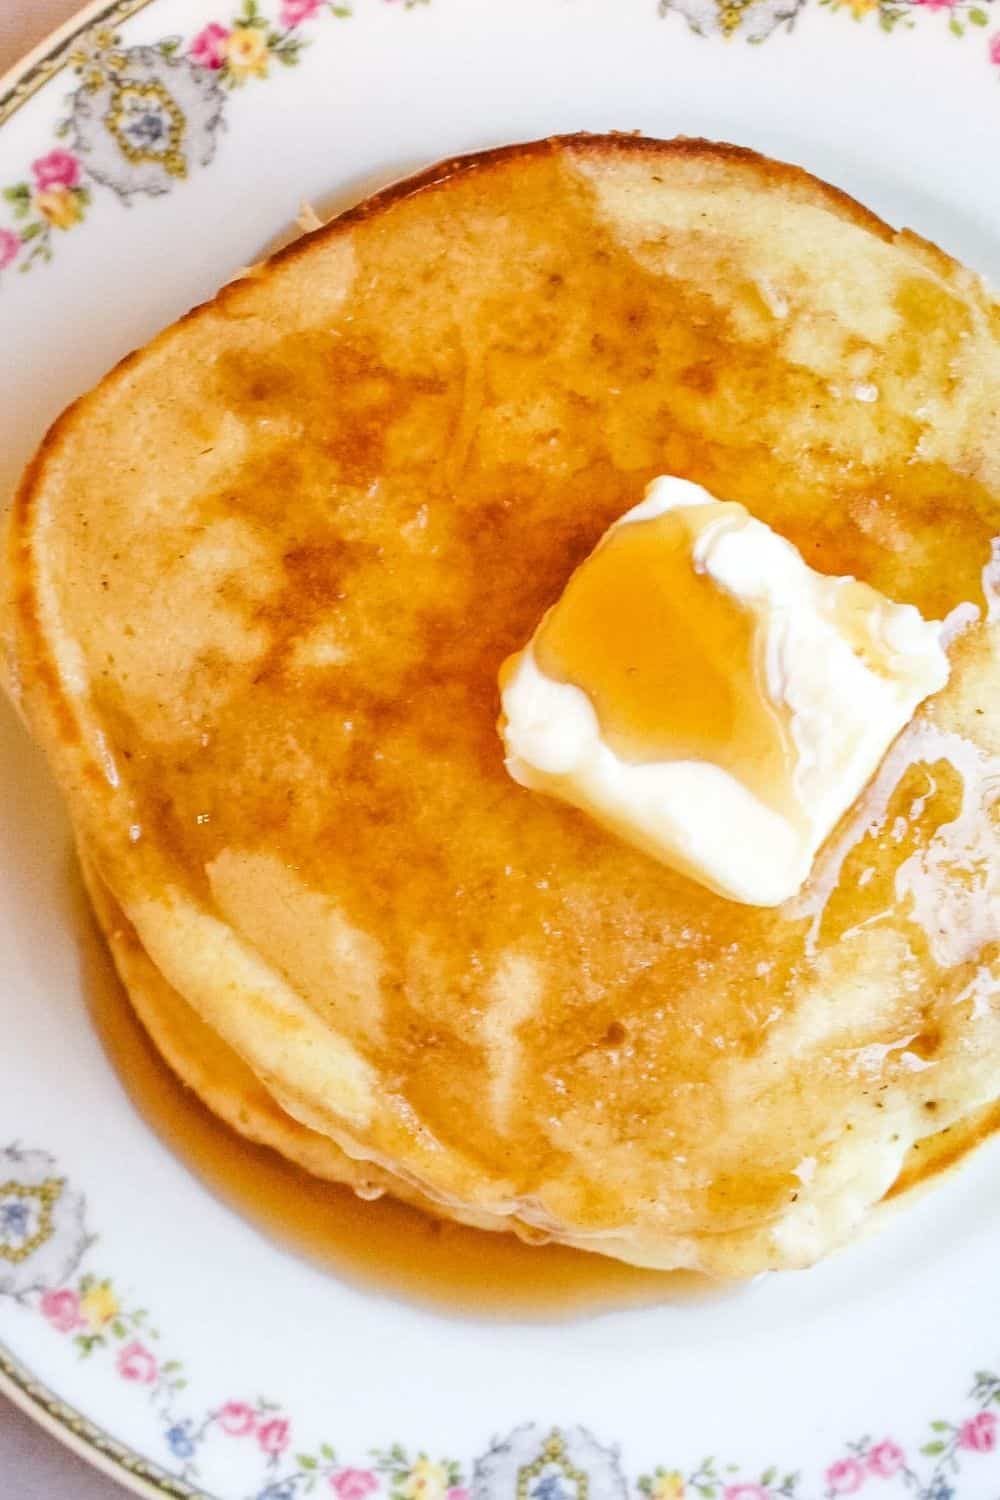 a stack of pancakes made without baking powder, topped with butter and syrup